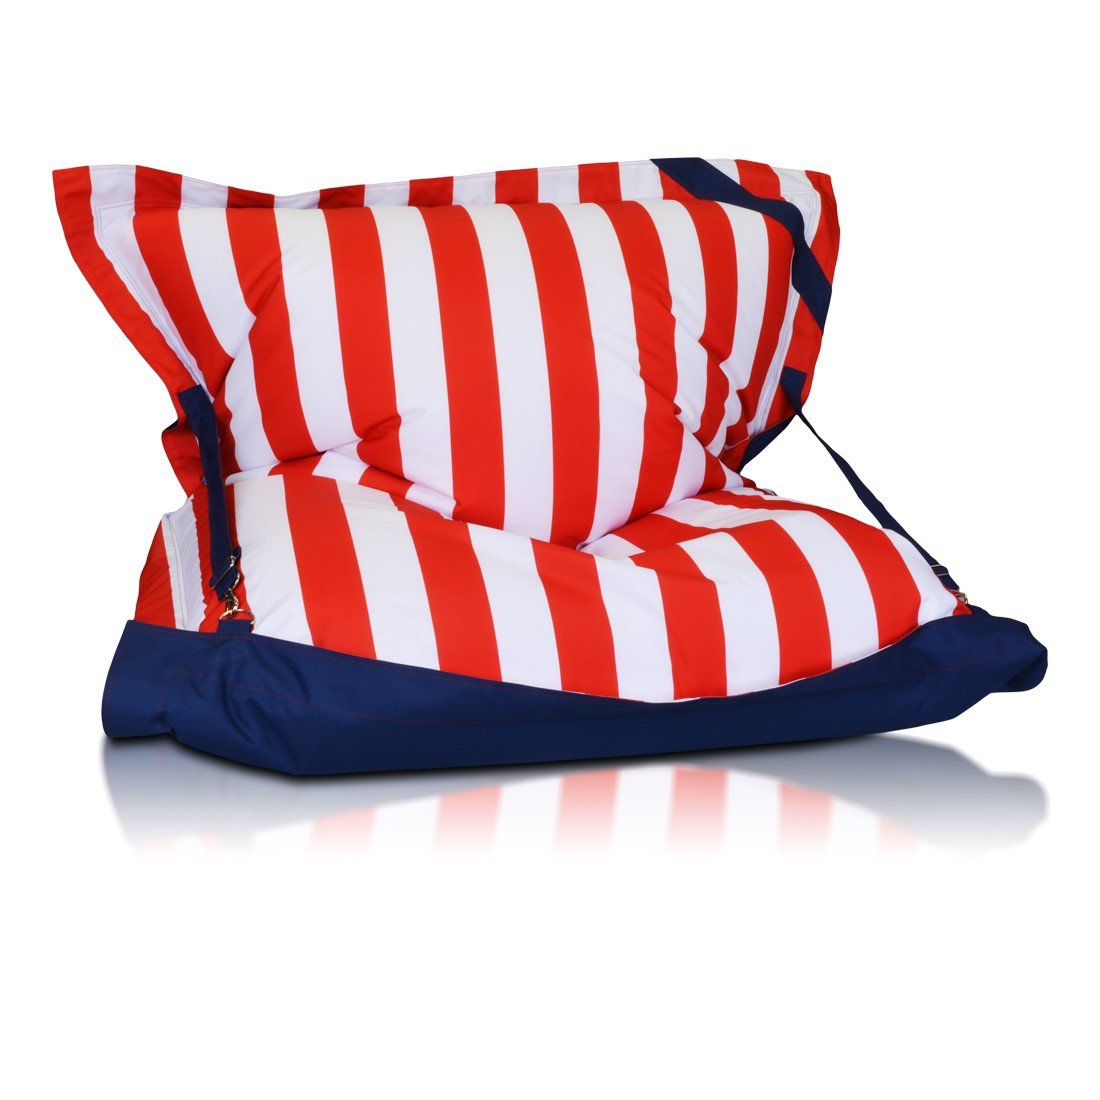 FINNISH STRIPES Red White Adult - Scandinavian Stories by Marton